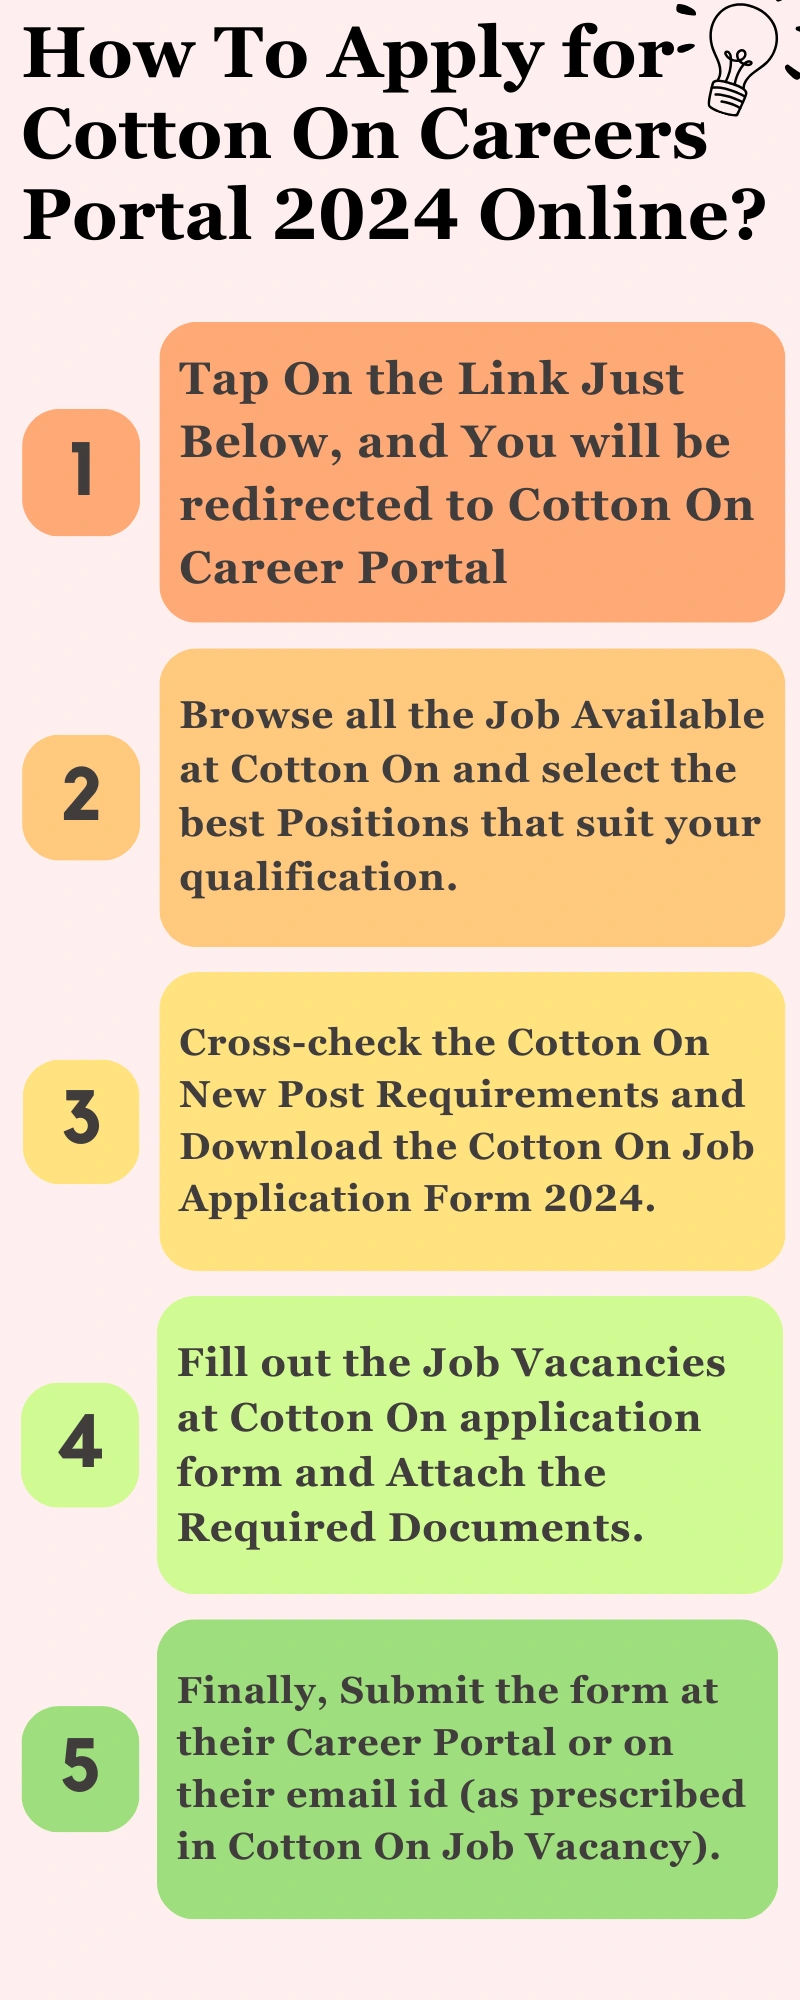 How To Apply for Cotton On Careers Portal 2024 Online?